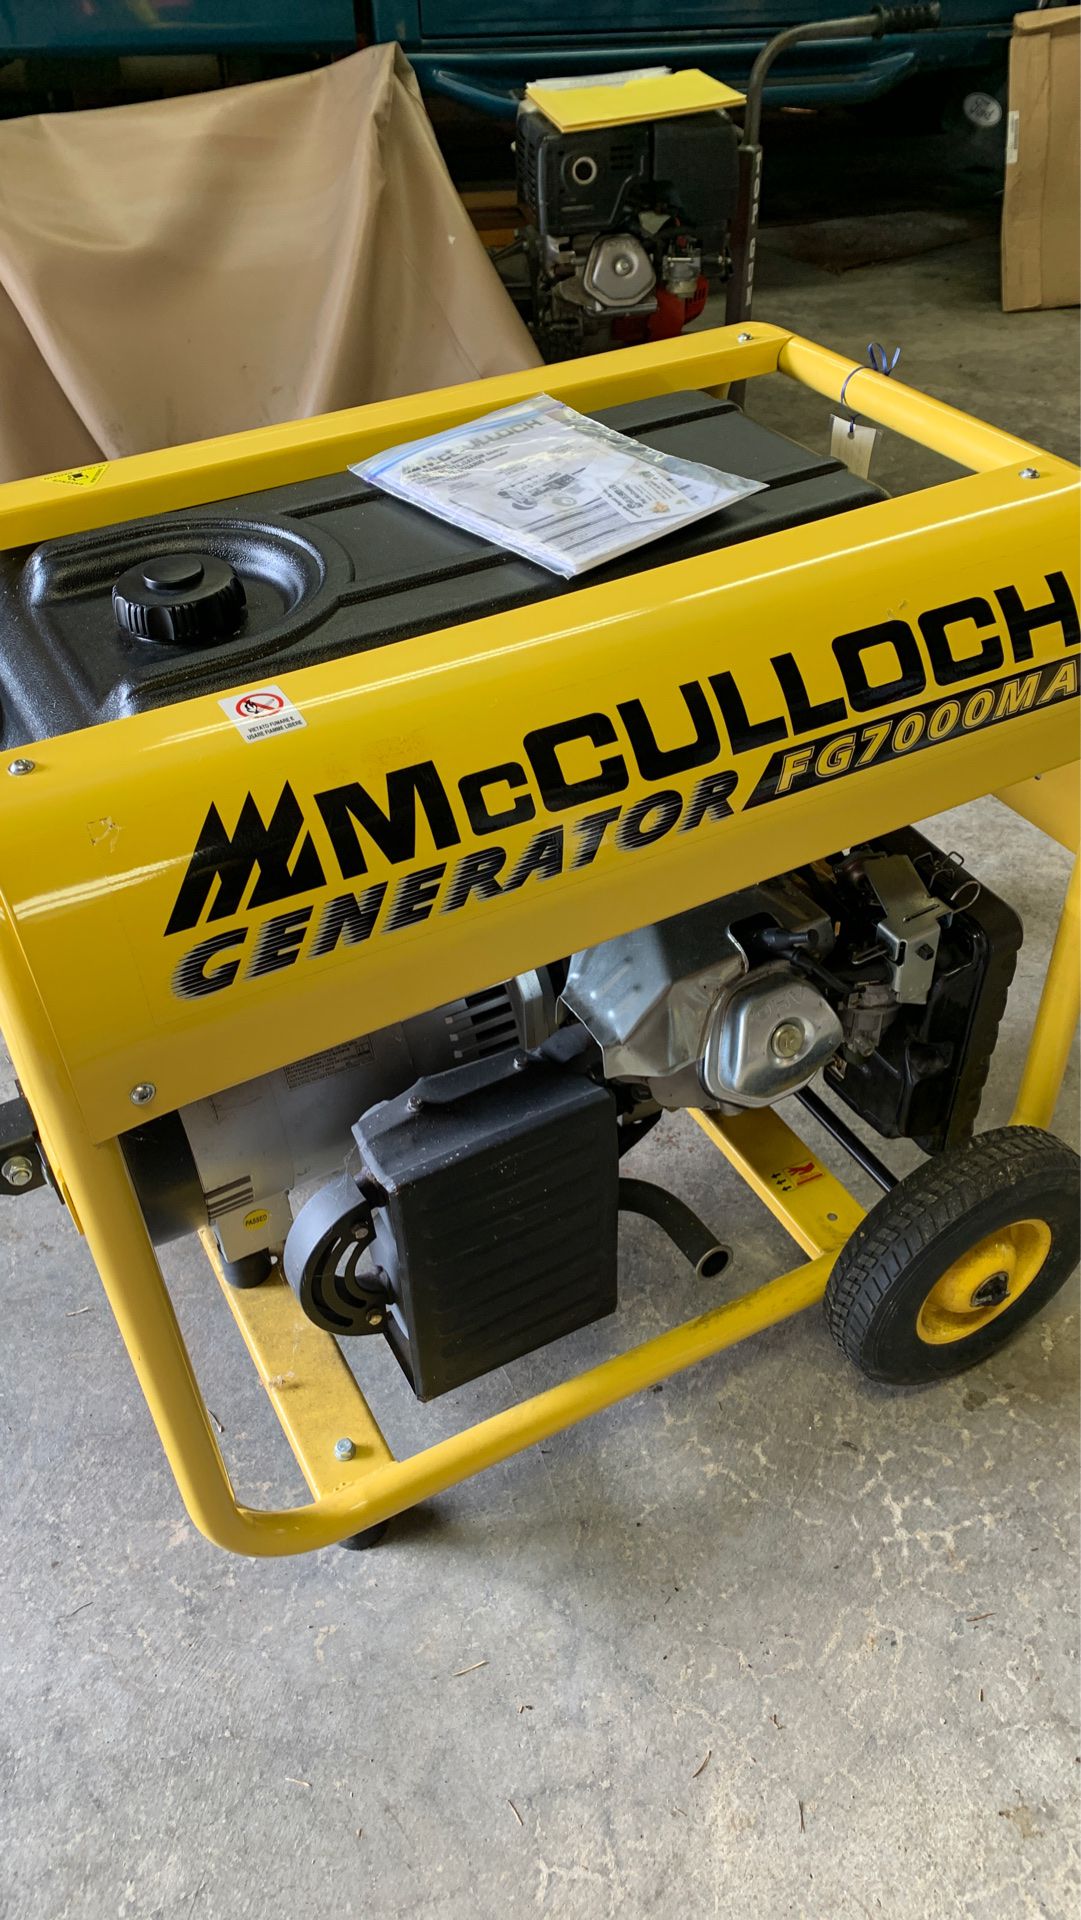 McCulloch 13 HP 4 cycle gas powered portable generator